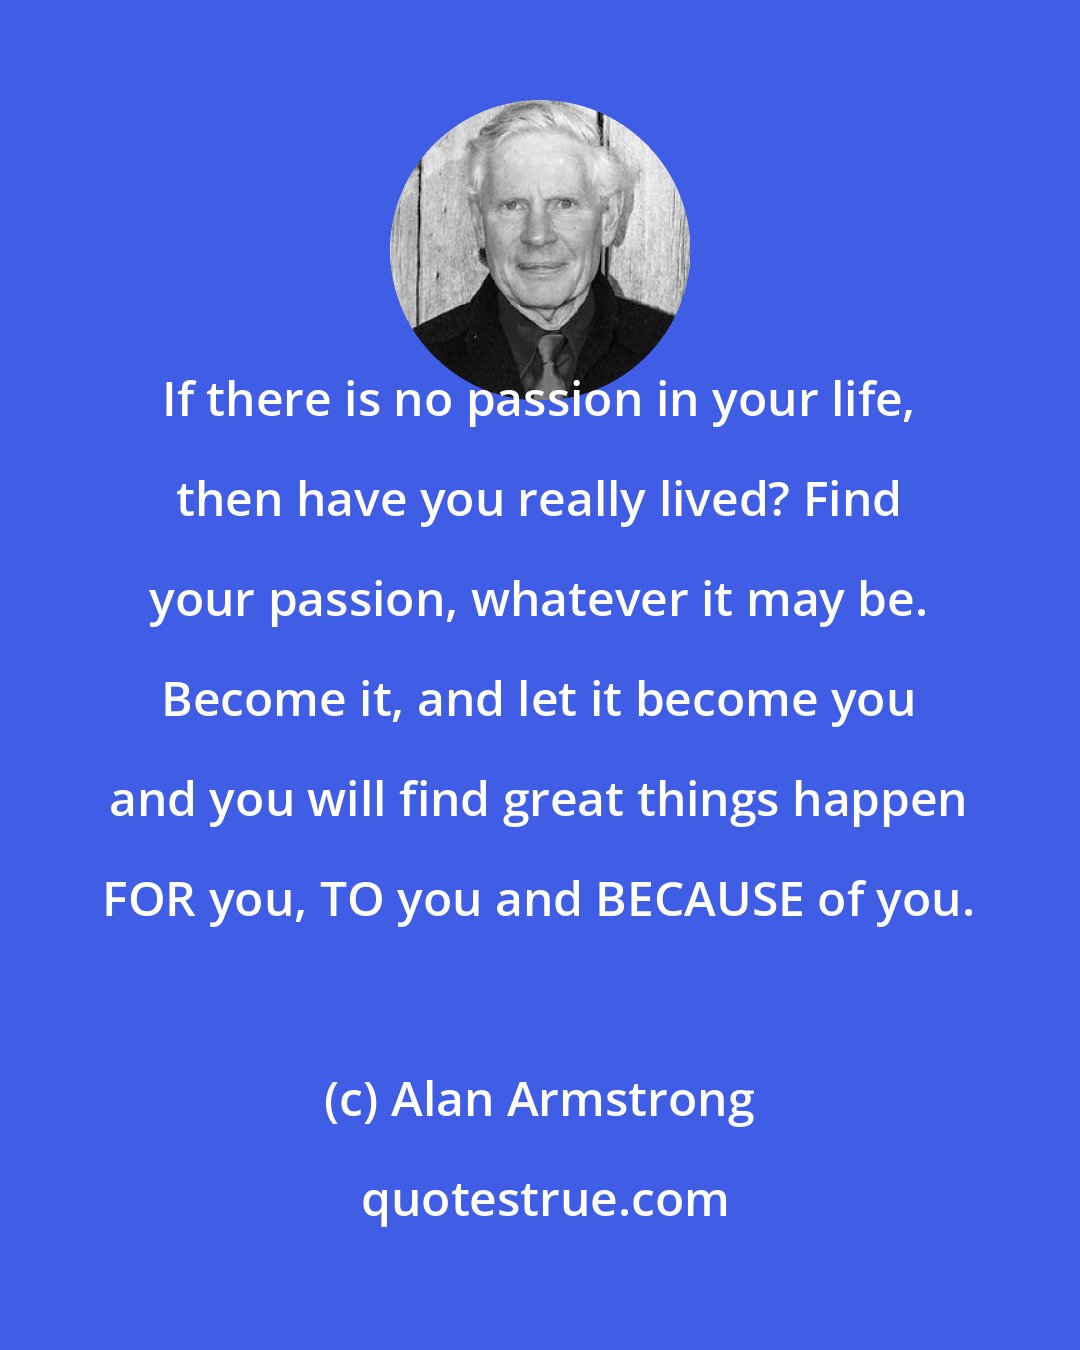 Alan Armstrong: If there is no passion in your life, then have you really lived? Find your passion, whatever it may be. Become it, and let it become you and you will find great things happen FOR you, TO you and BECAUSE of you.